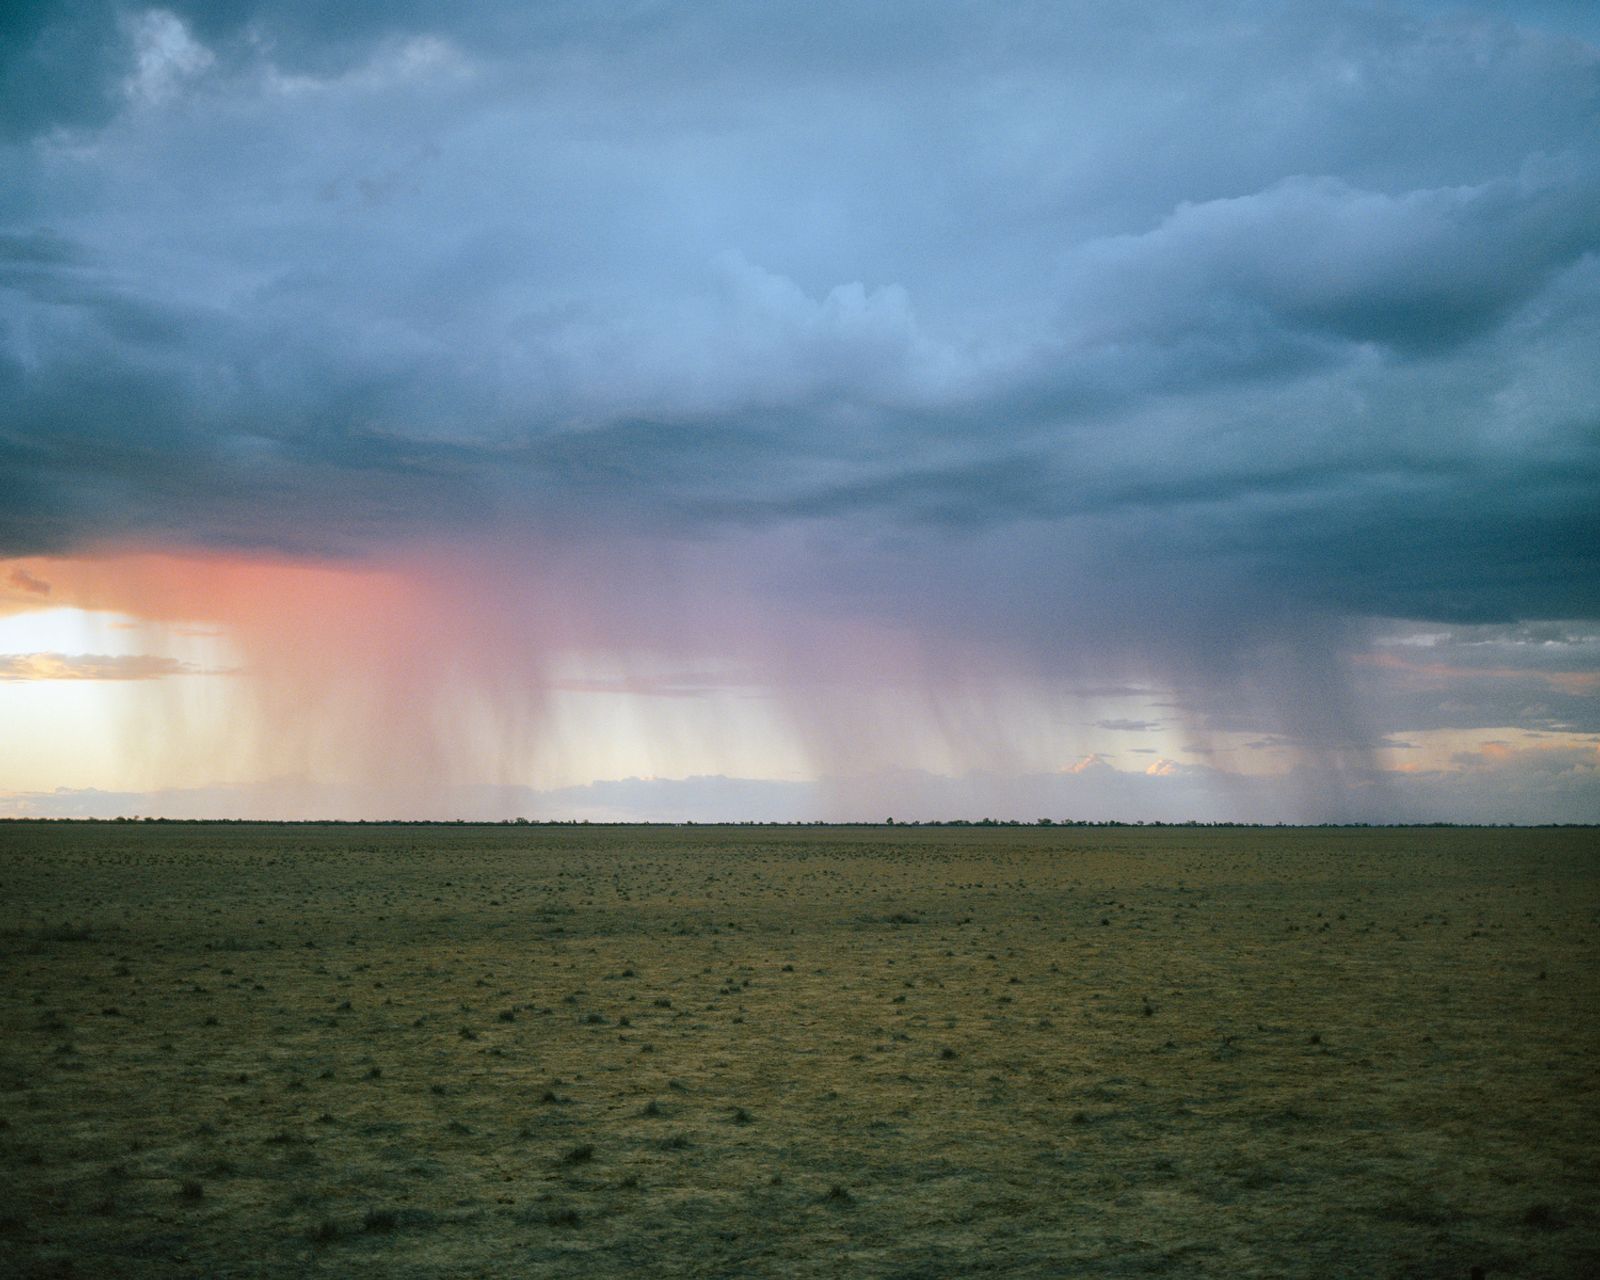 © Adam Ferguson - Image from the Big Sky photography project